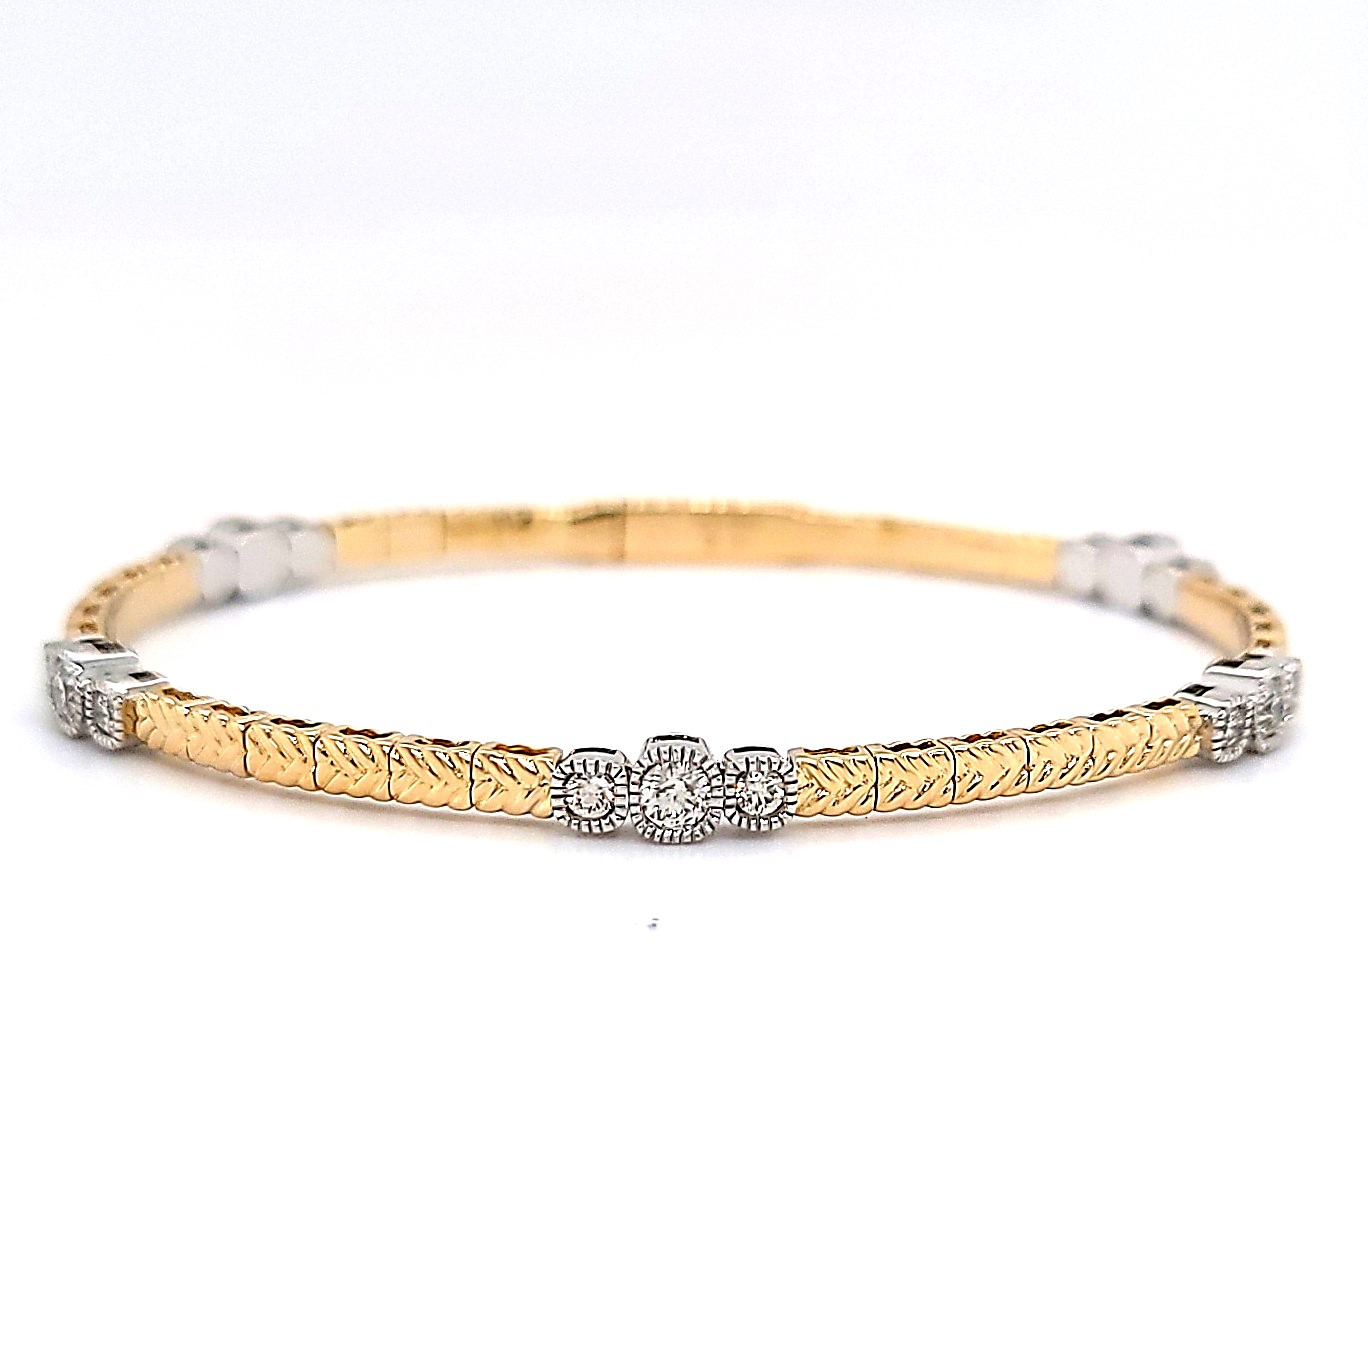 Vahan Sterling Silver 14K Yellow Gold Bracelet with Chain Link Design -  Vahan